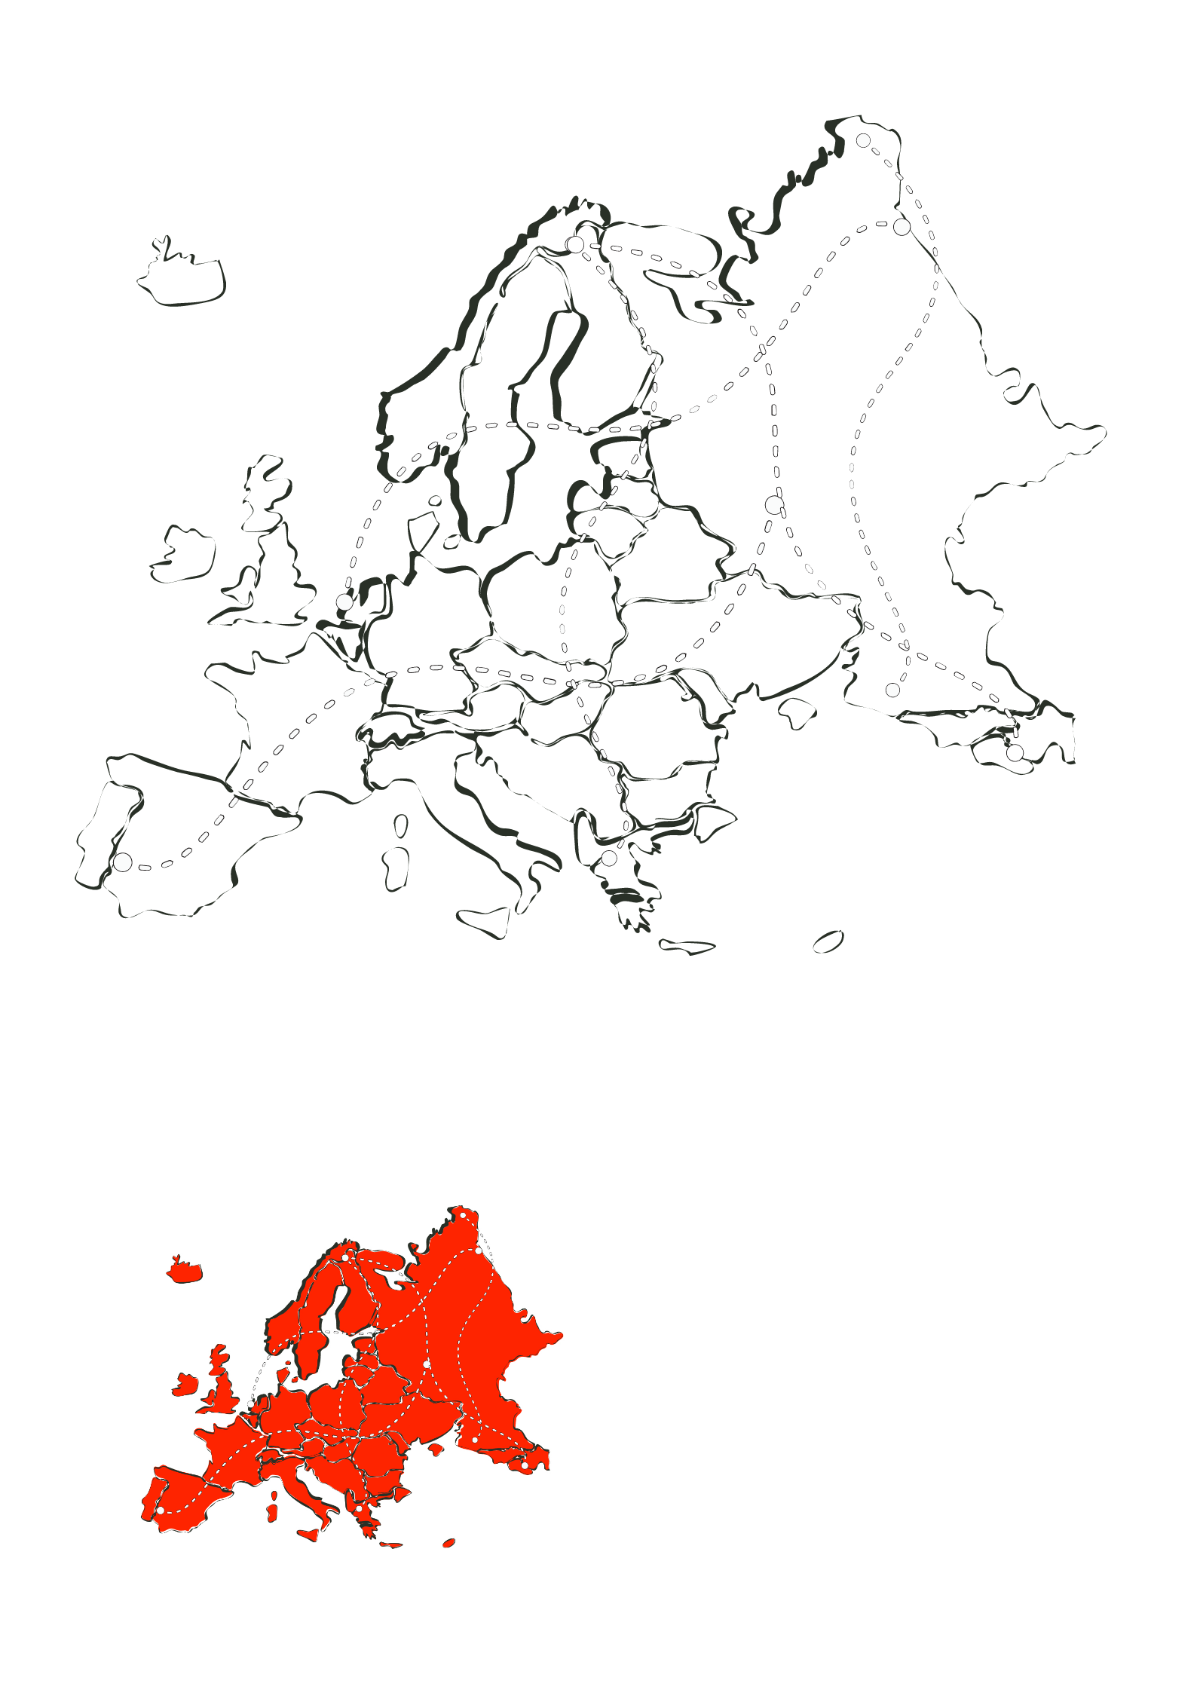 Europe Road Map Coloring Page